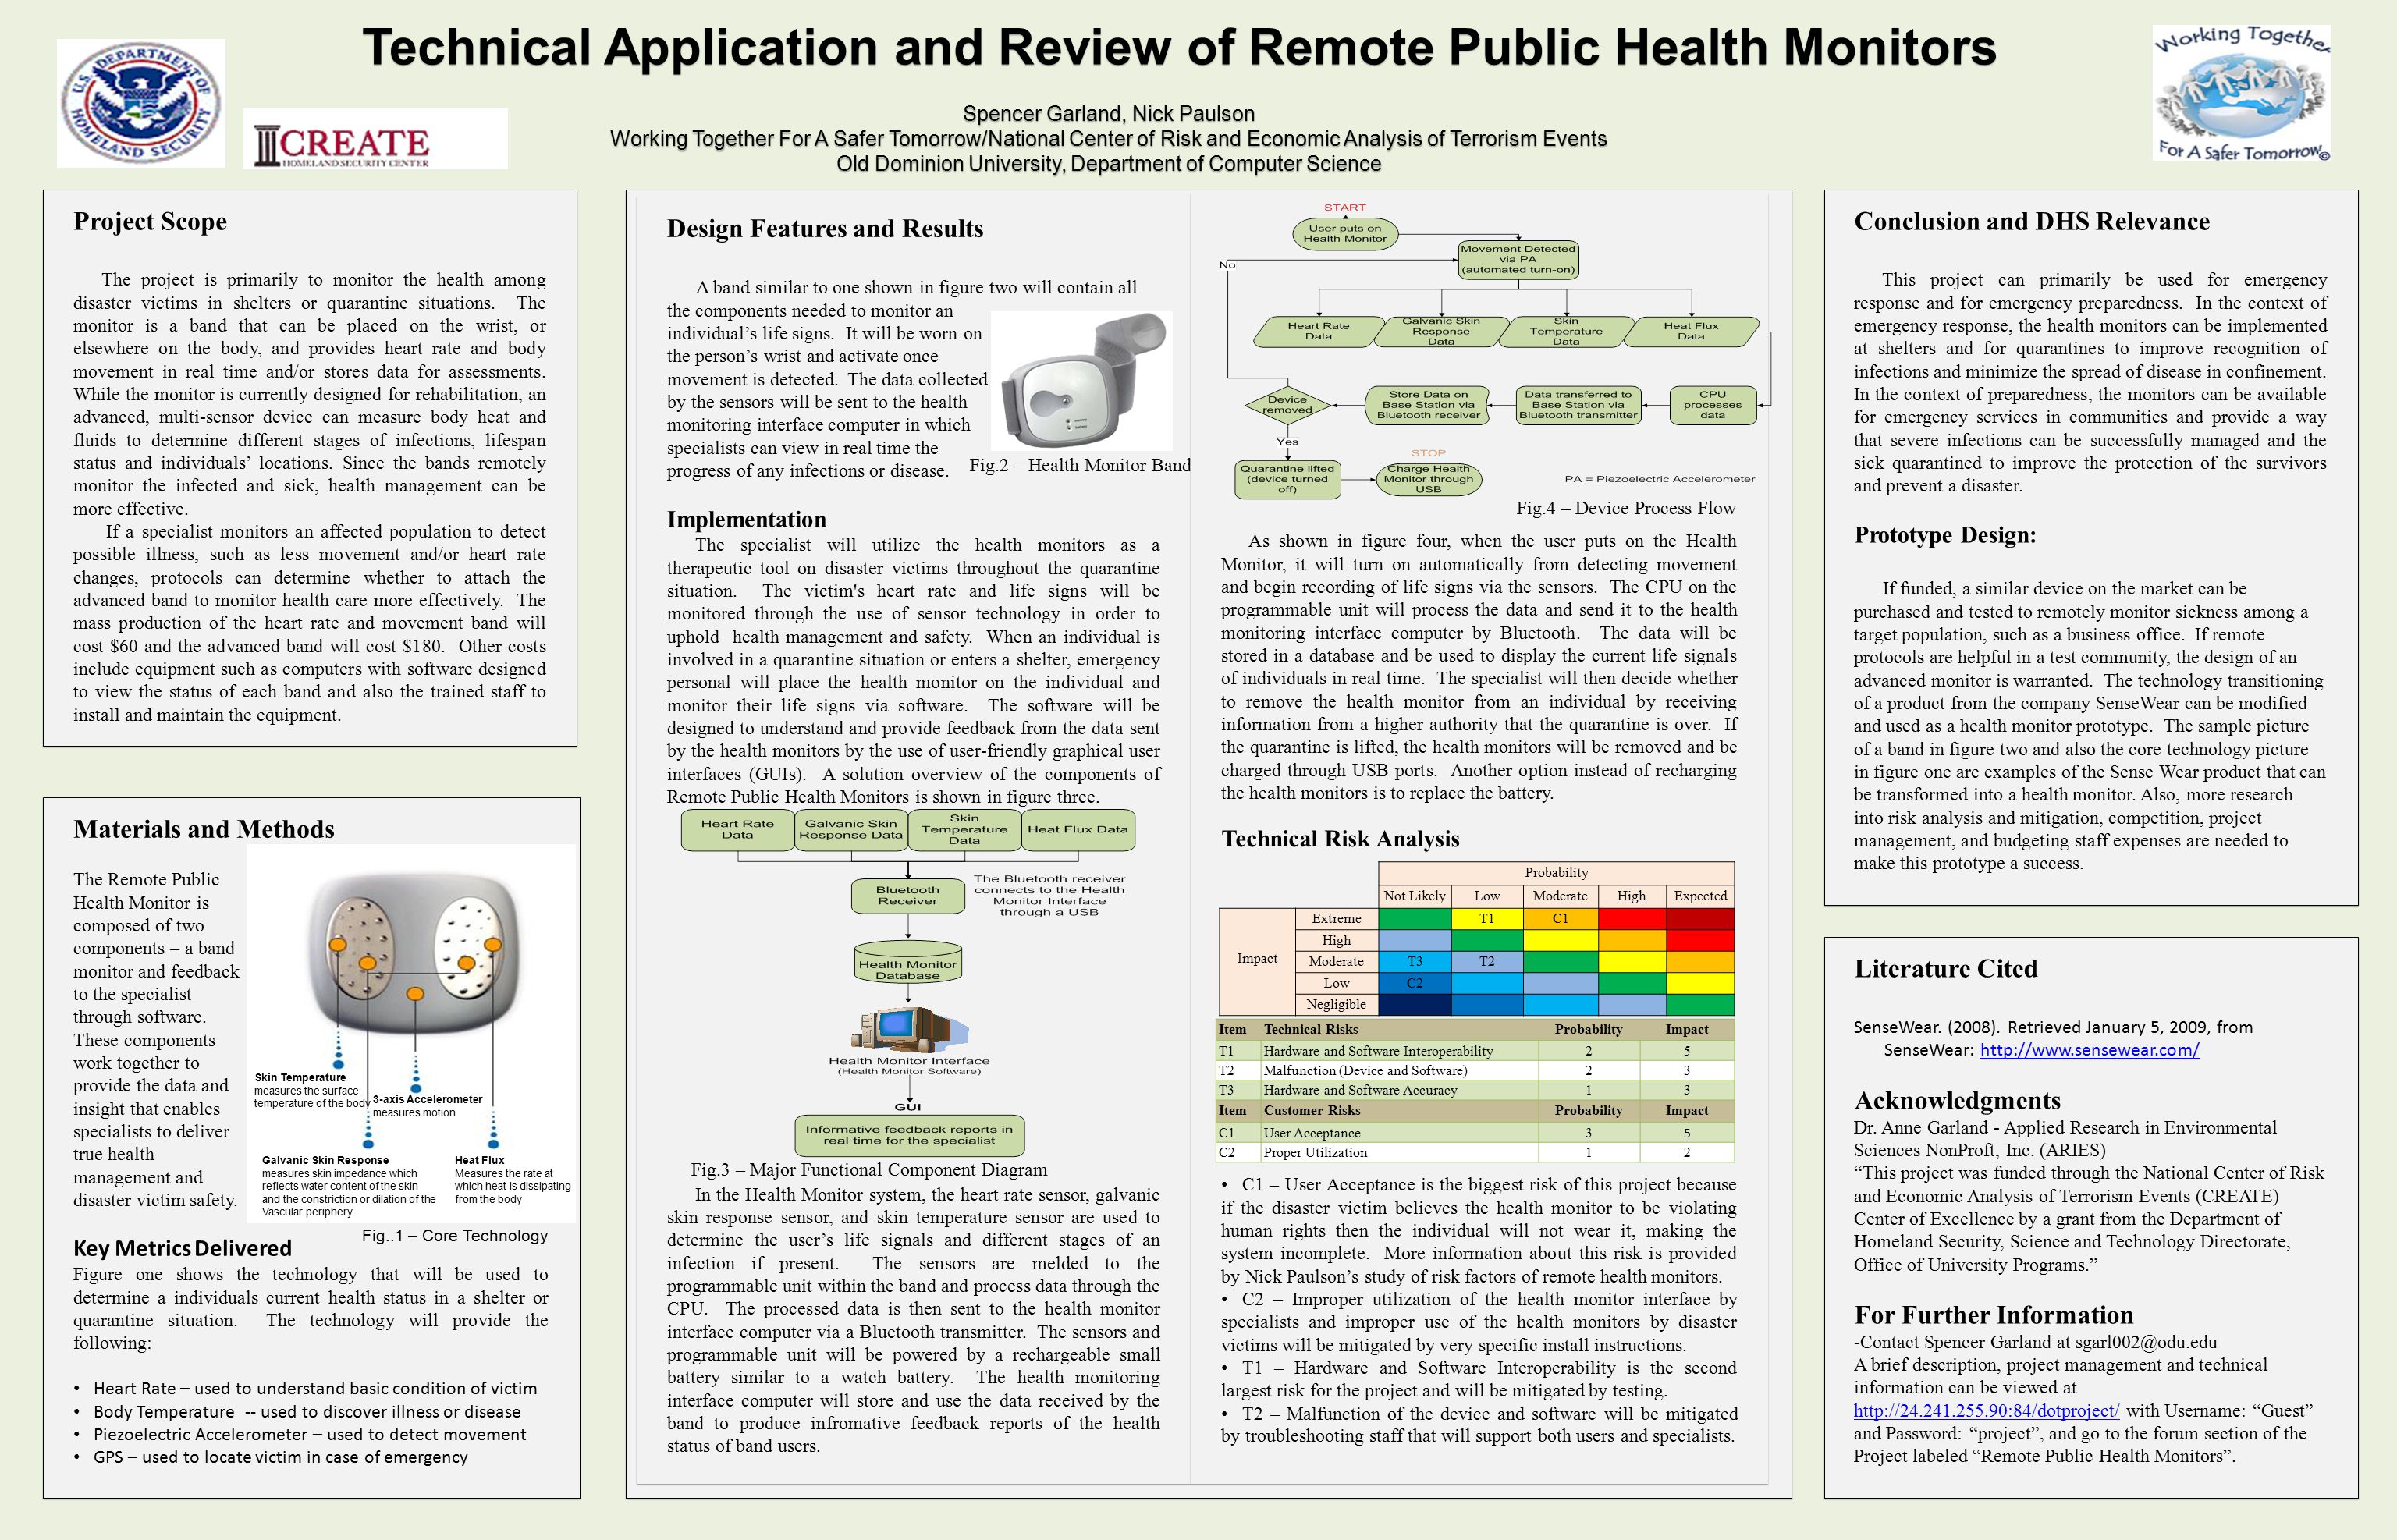 Technical Application and Review of Remote Public Health Monitors Project Scope The project is primarily to monitor the health among disaster victims in shelters or quarantine situations.